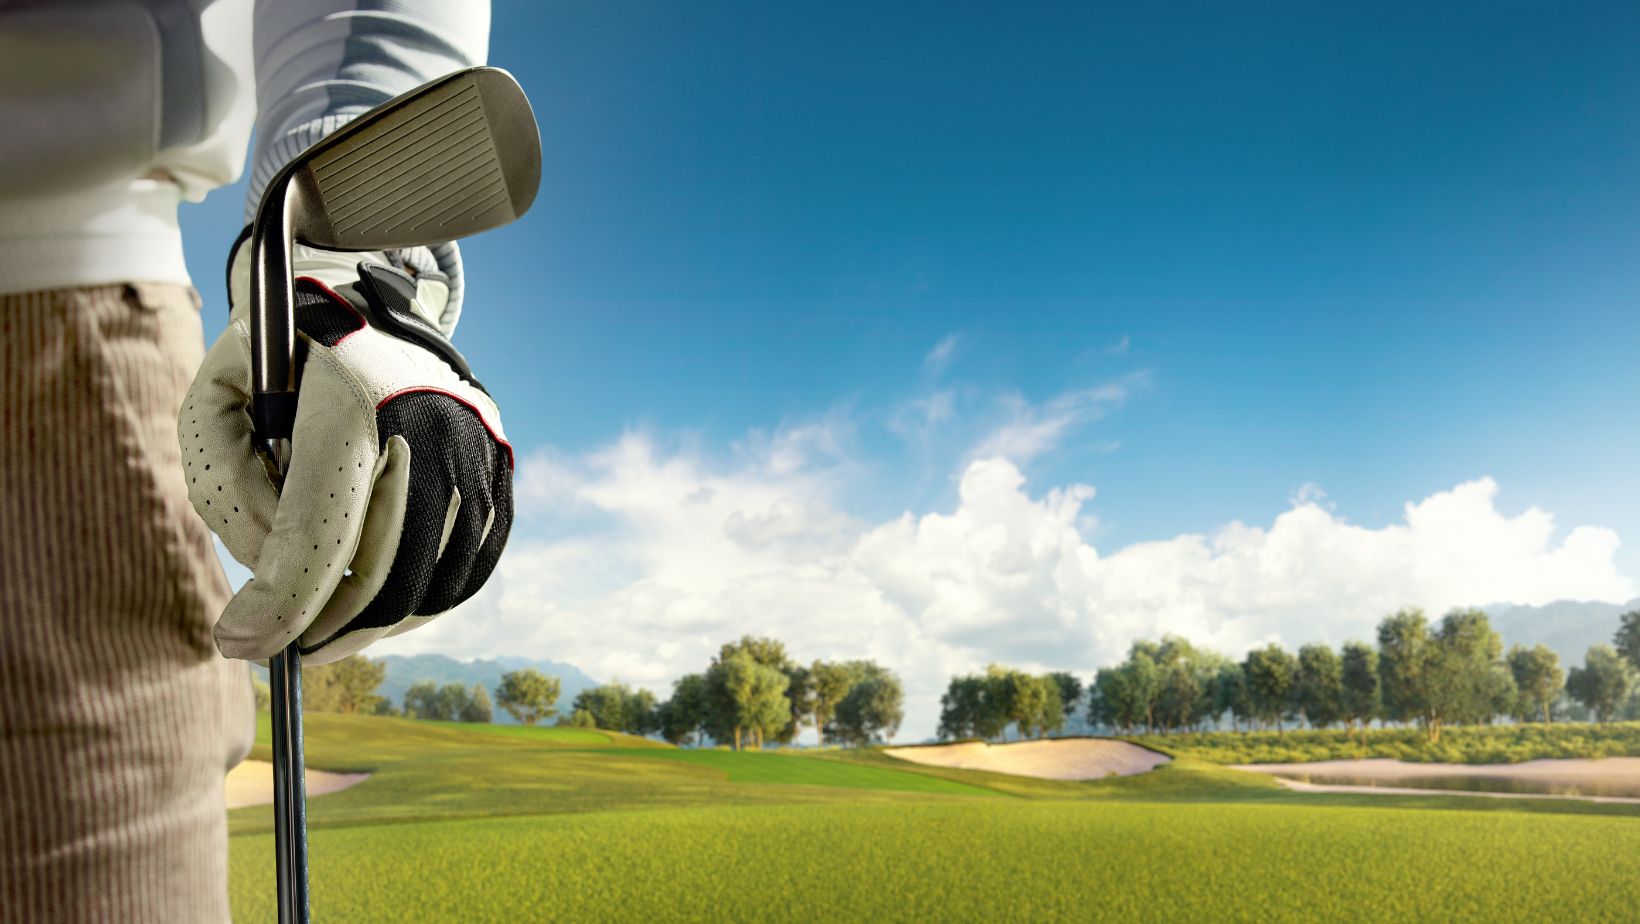 Exercises to Improve Your Game With Golf Simulators